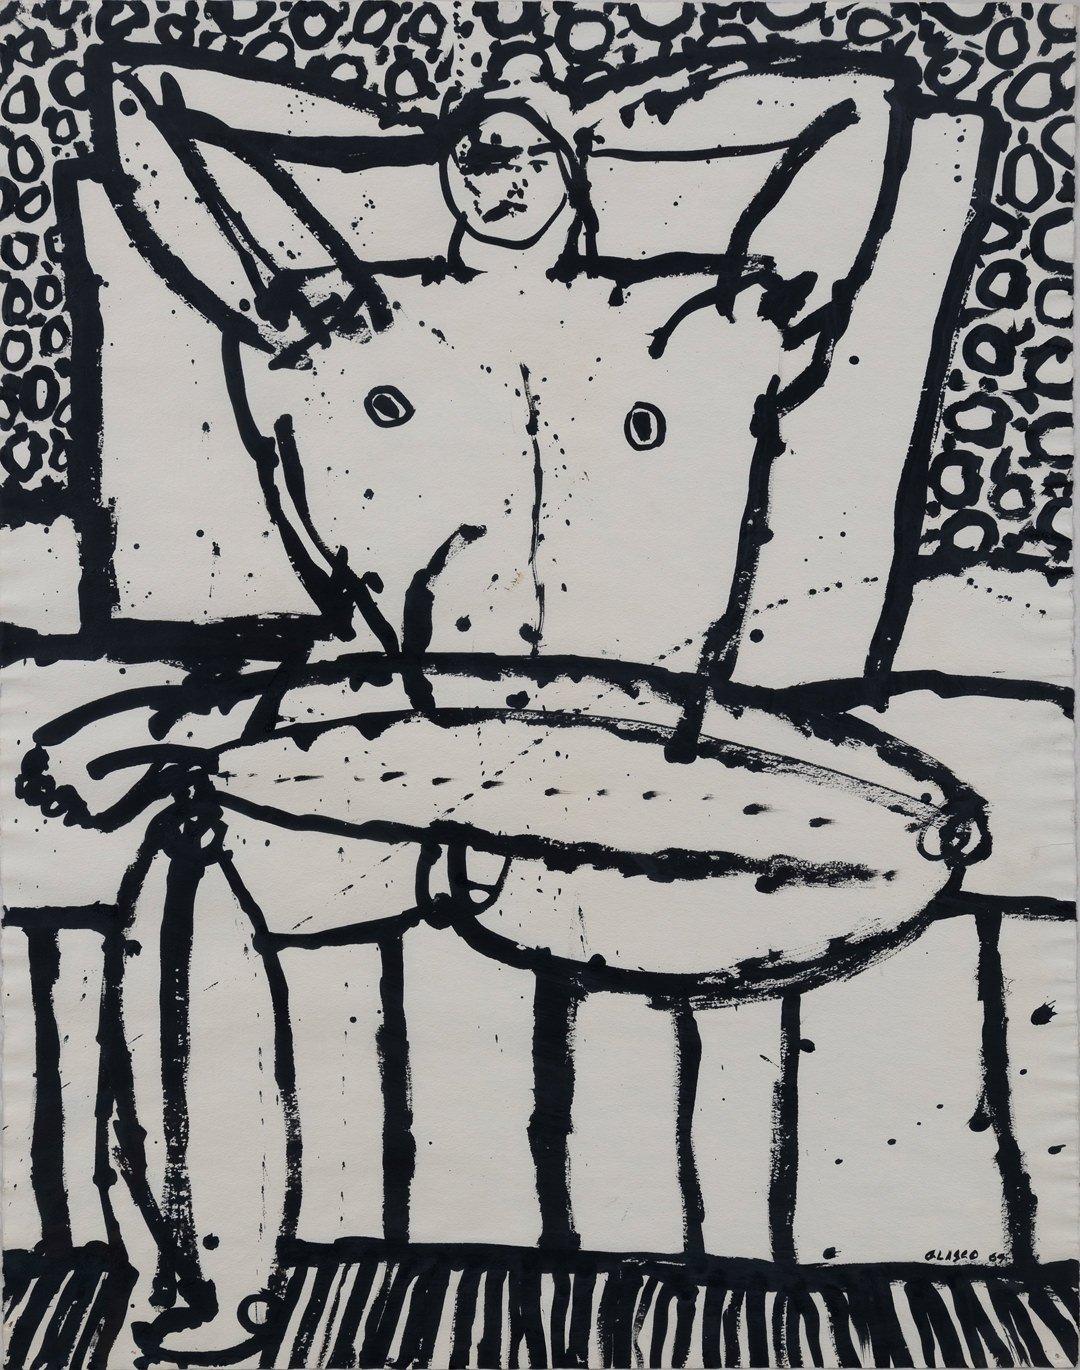 Seated Male, Mid-Century Male Nude Figurative Expressionist Drawing on Paper